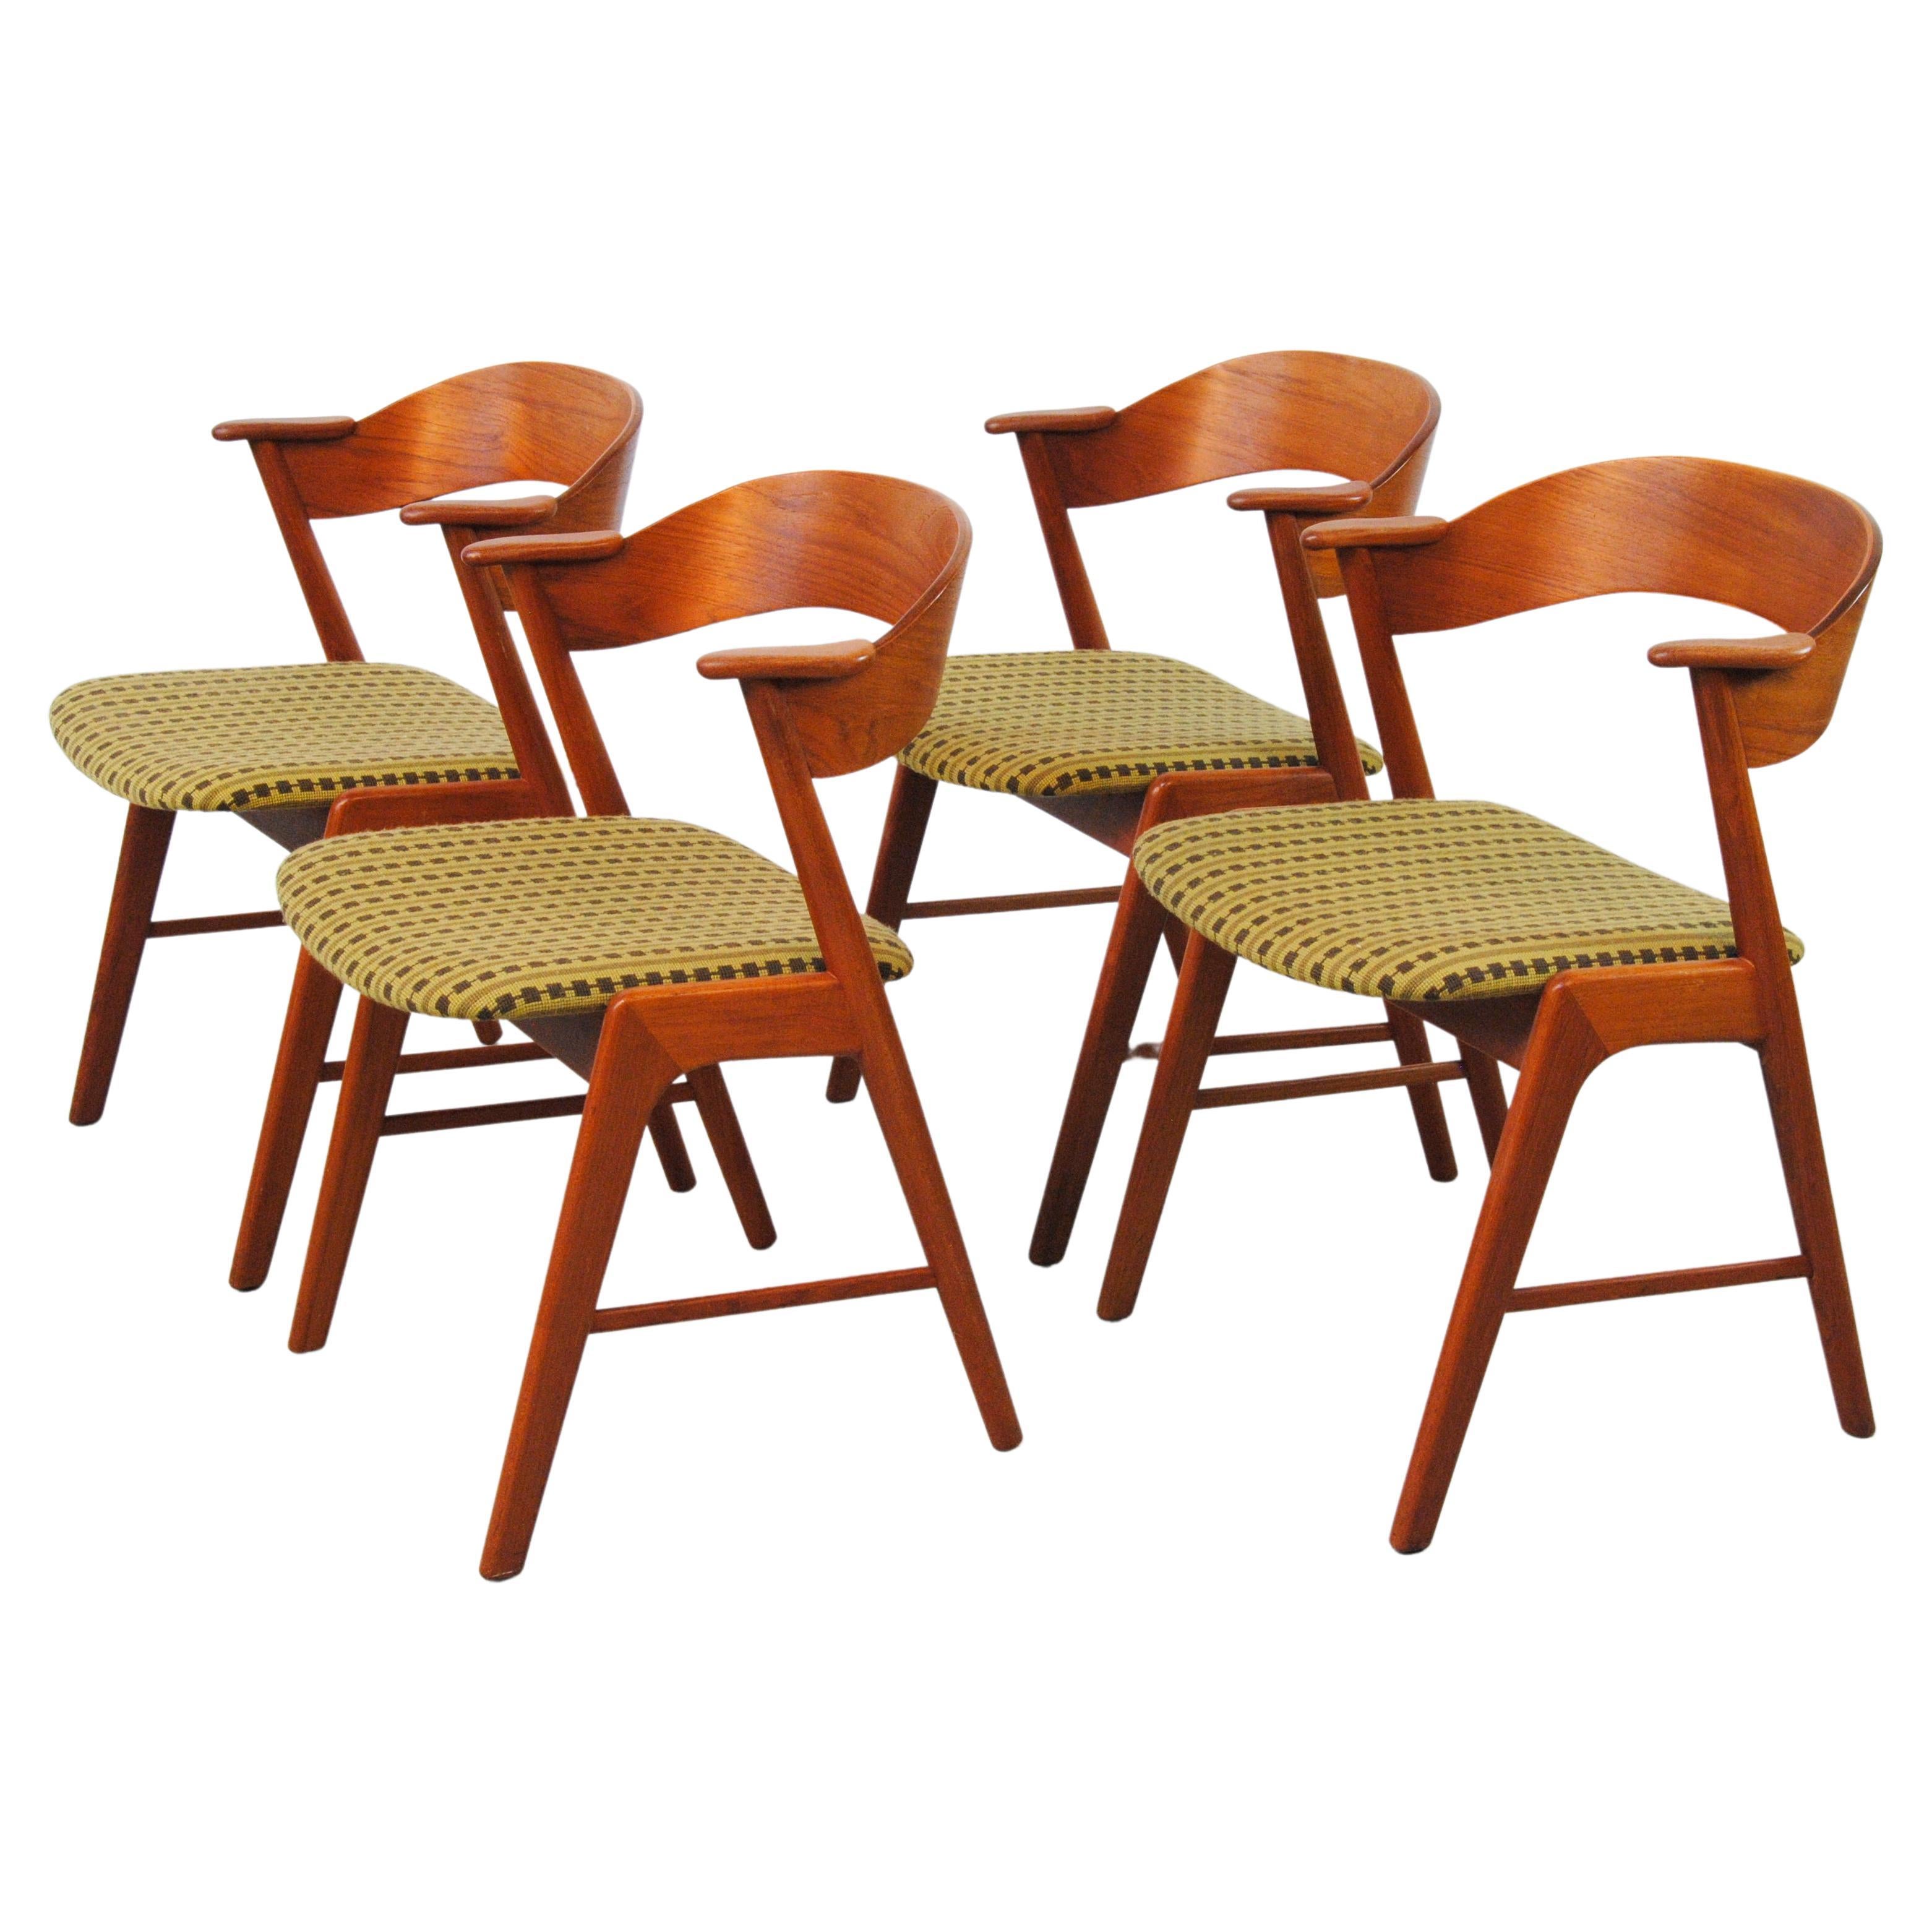 Four Fully Restored Danish Teak Dining Chairs Custom Reupholstery Included